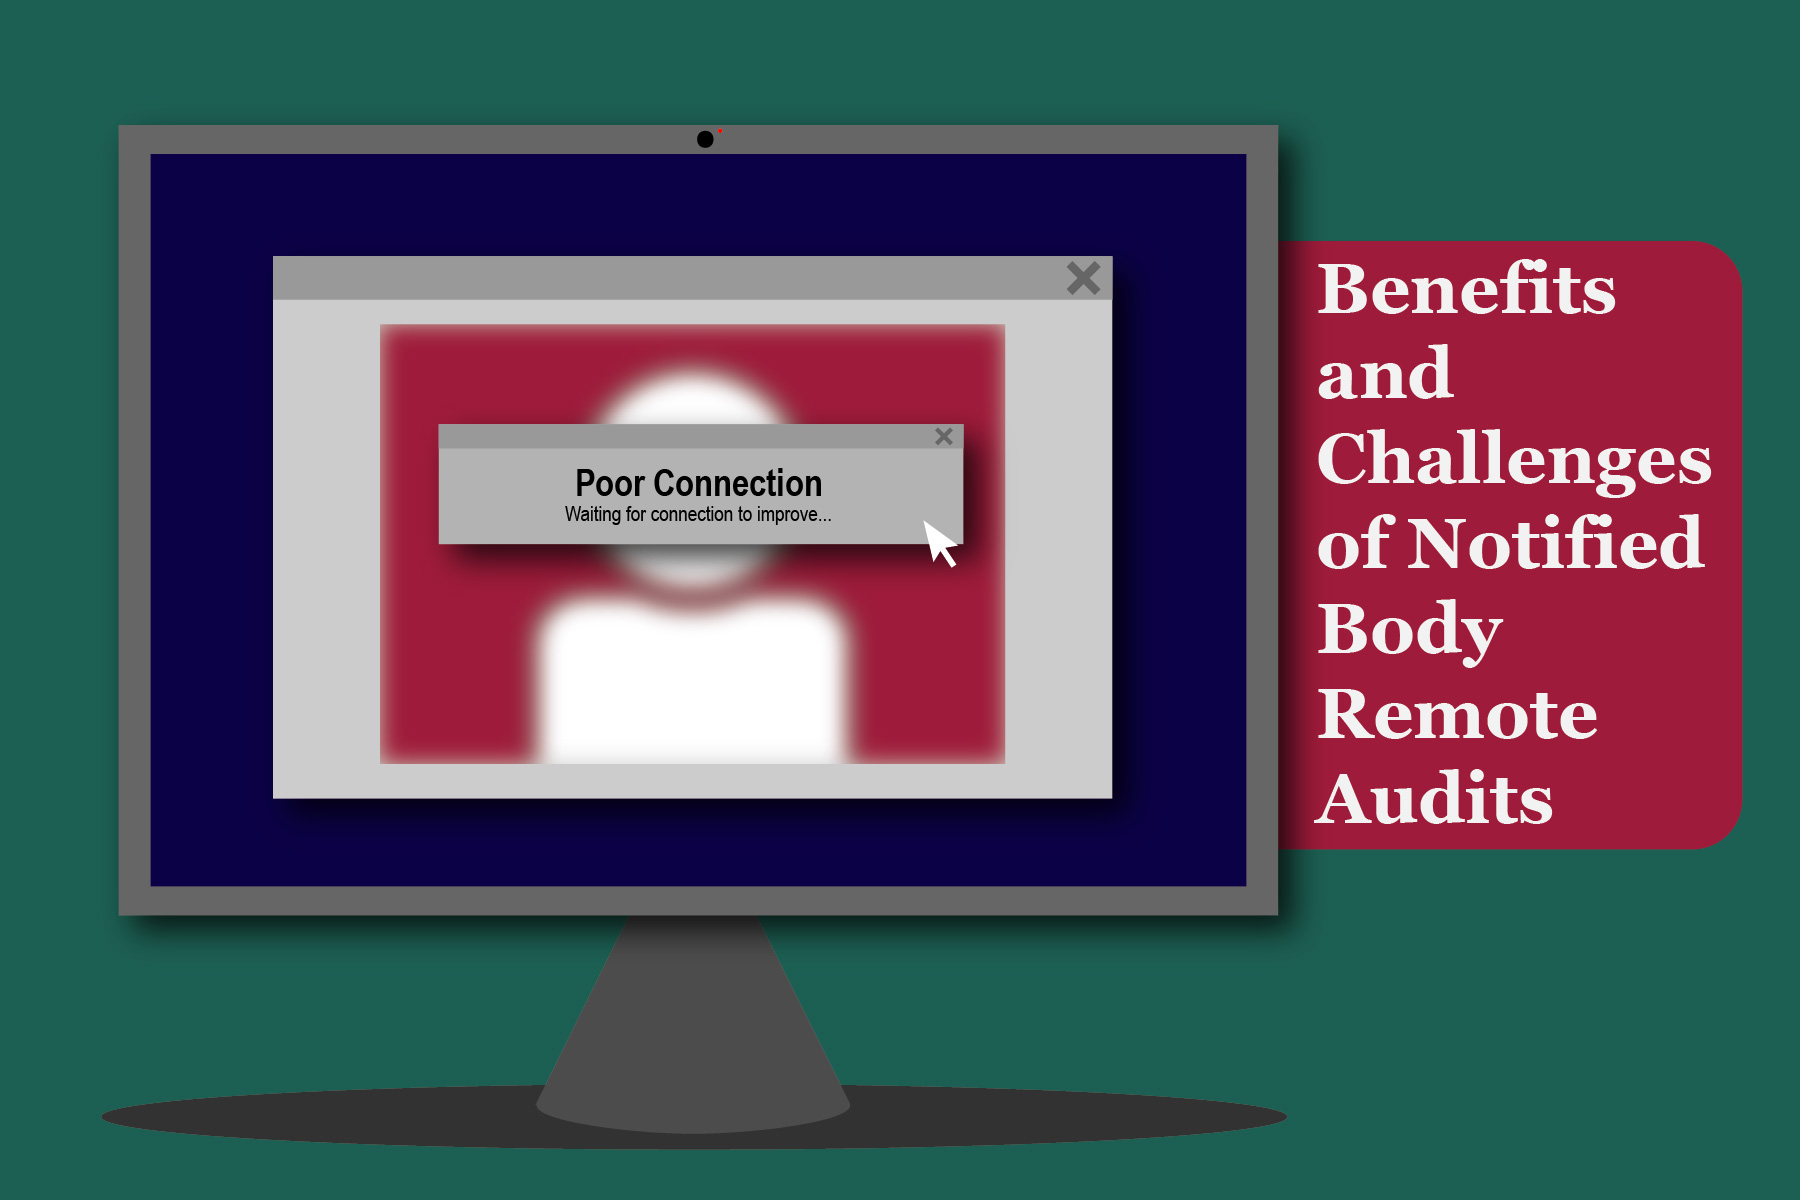 Benefits and Challenges of Notified Body Remote Audits